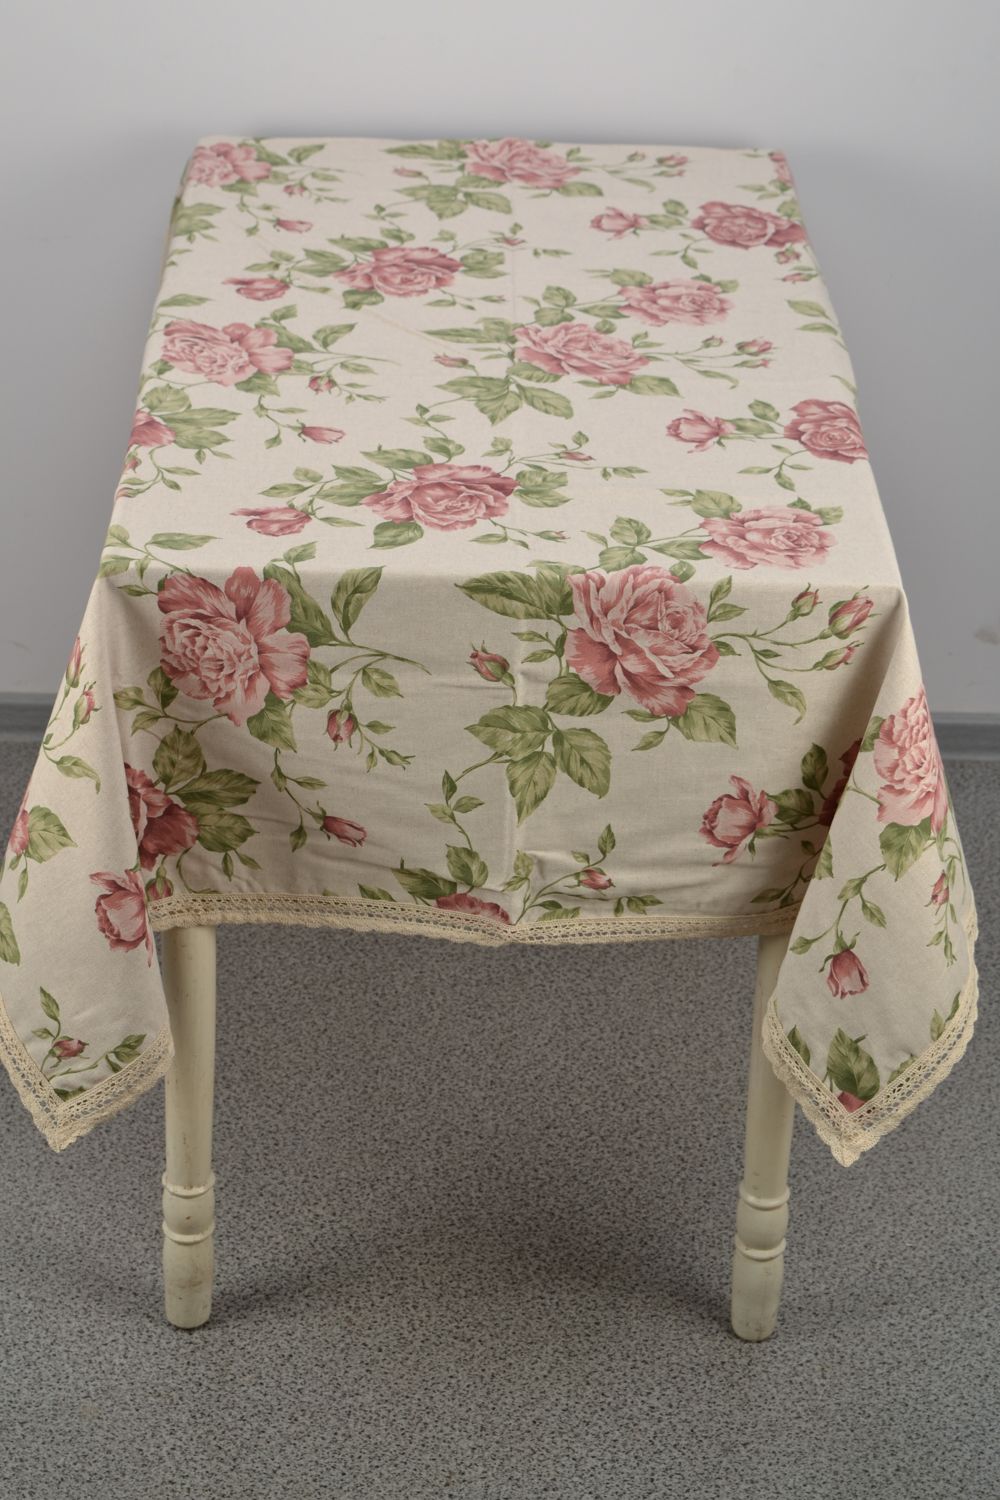 Handmade floral tablecloth sewn of cotton and polyamide photo 3